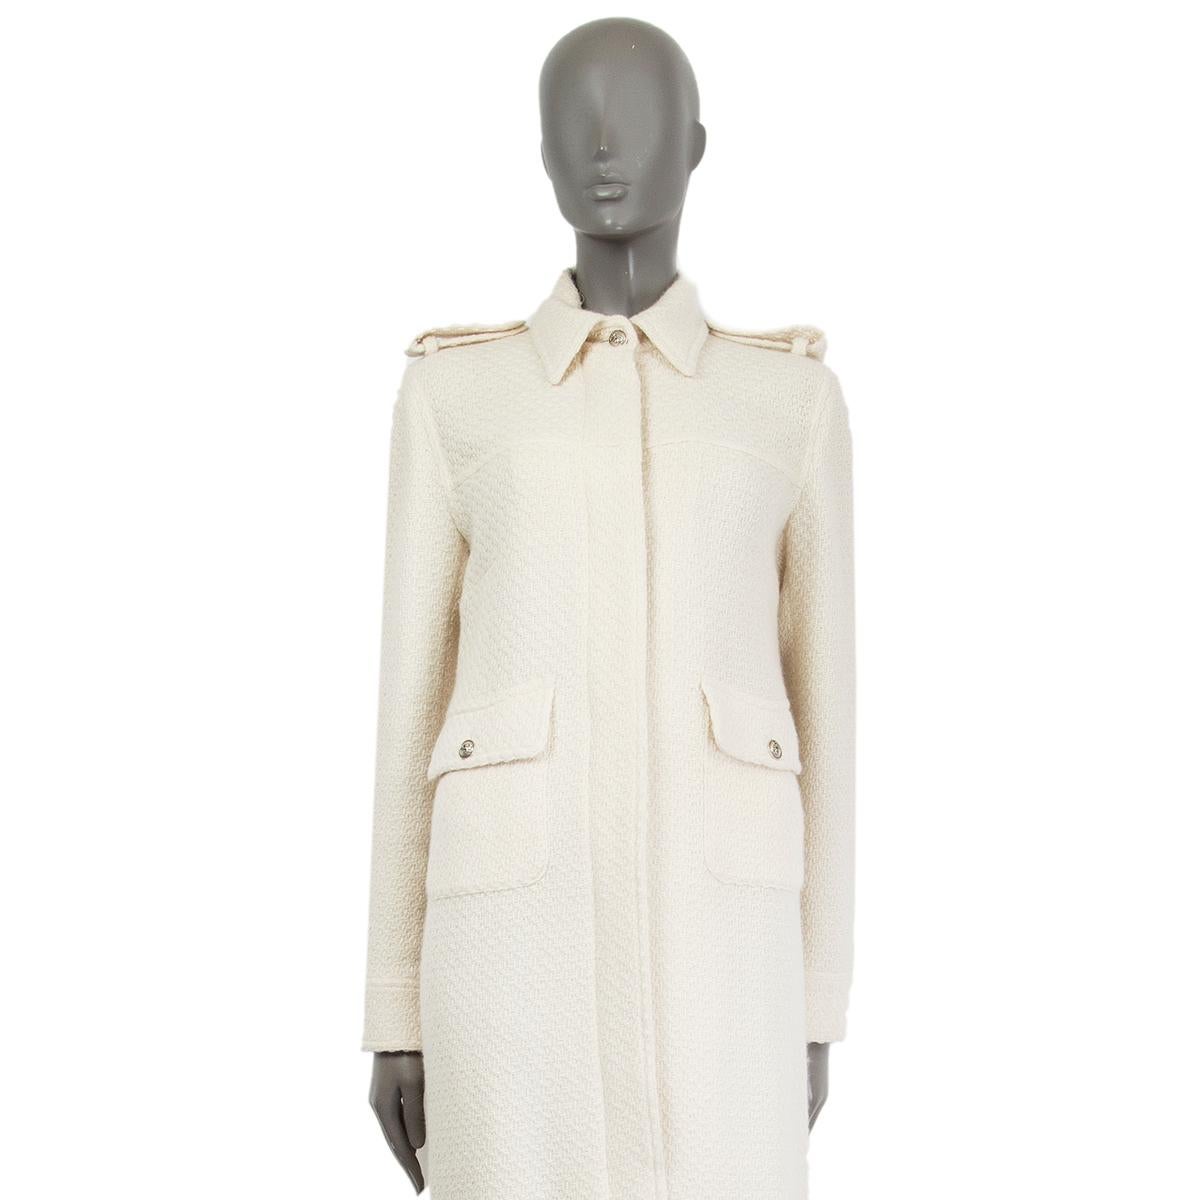 Chanel full-length knit coat in cream wool (75%) and angora (25%) featuring hidden buttons and slit on the back. Two flap-pockets at front and shoulder patches. Unlined. Has been worn and is in excellent condition. 

Tag Size 40
Size M
Shoulder